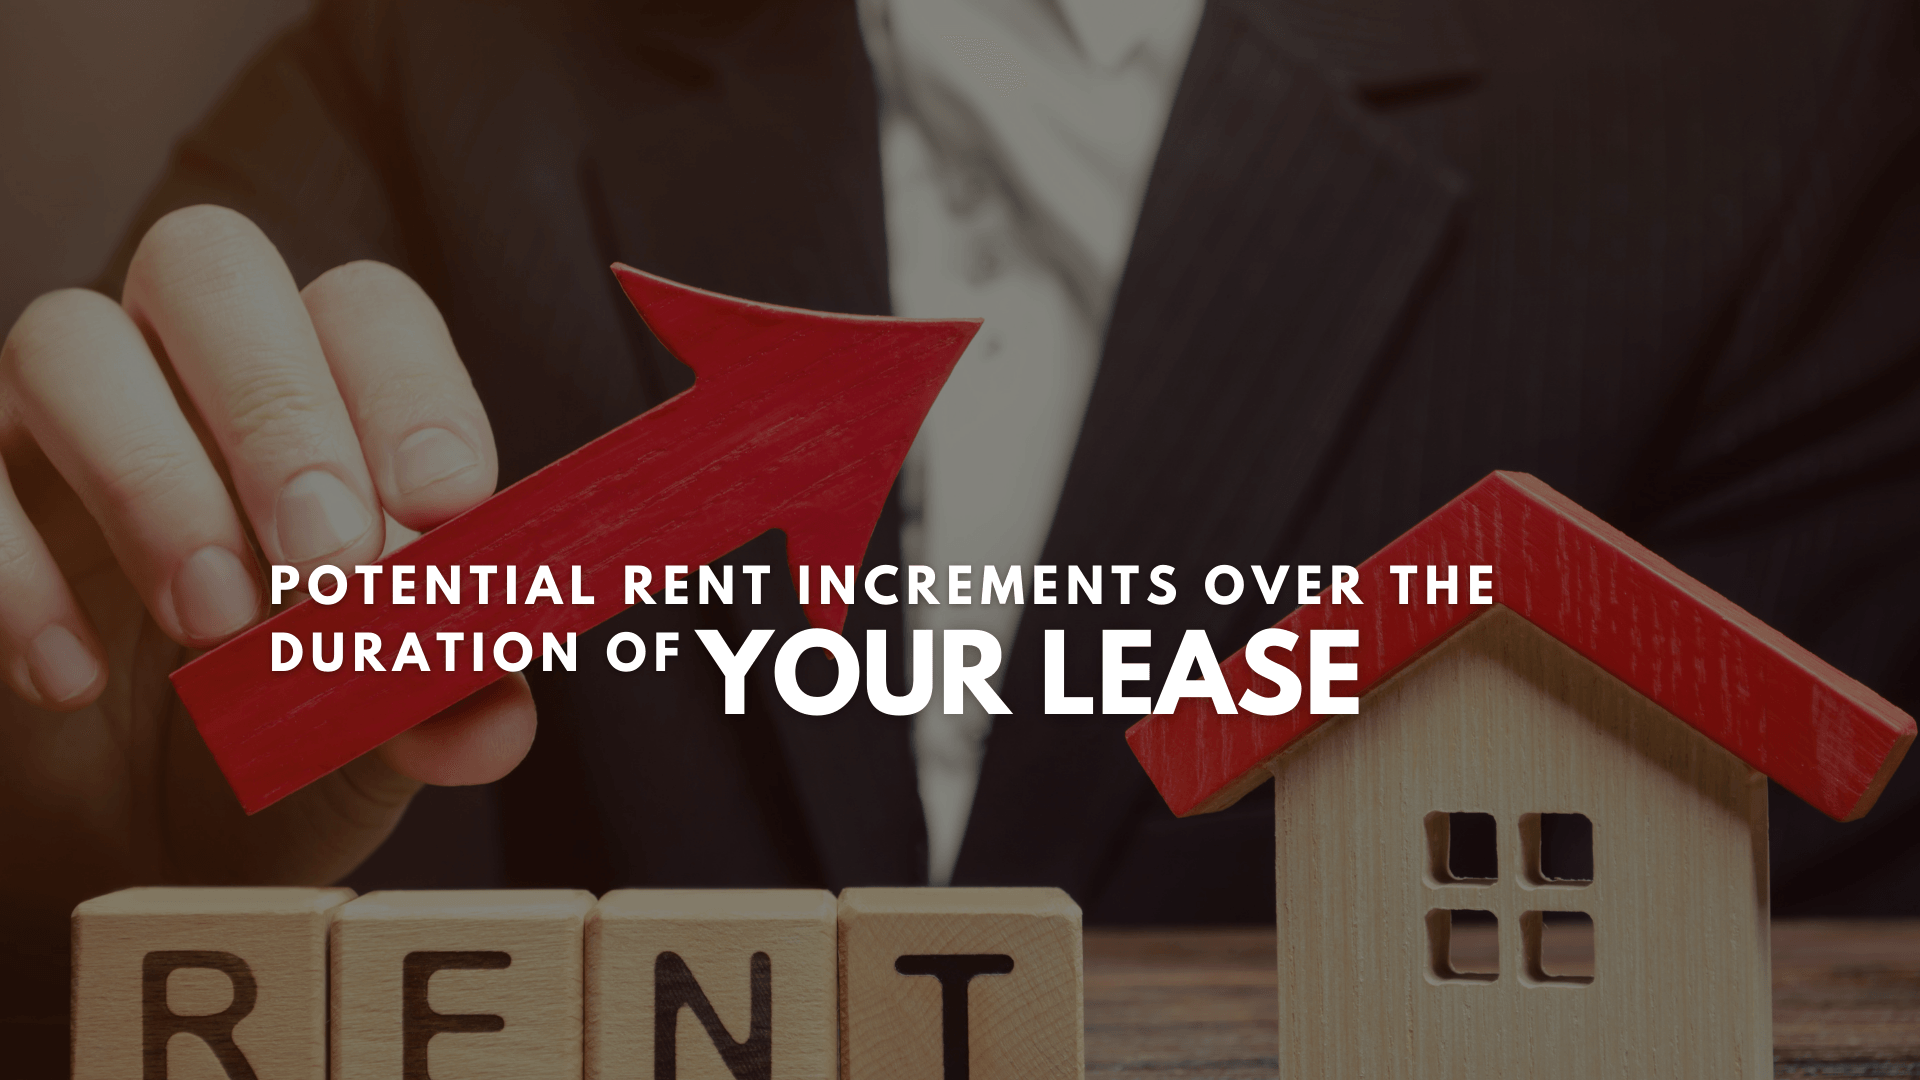 Review rentals and leases to increase profit.